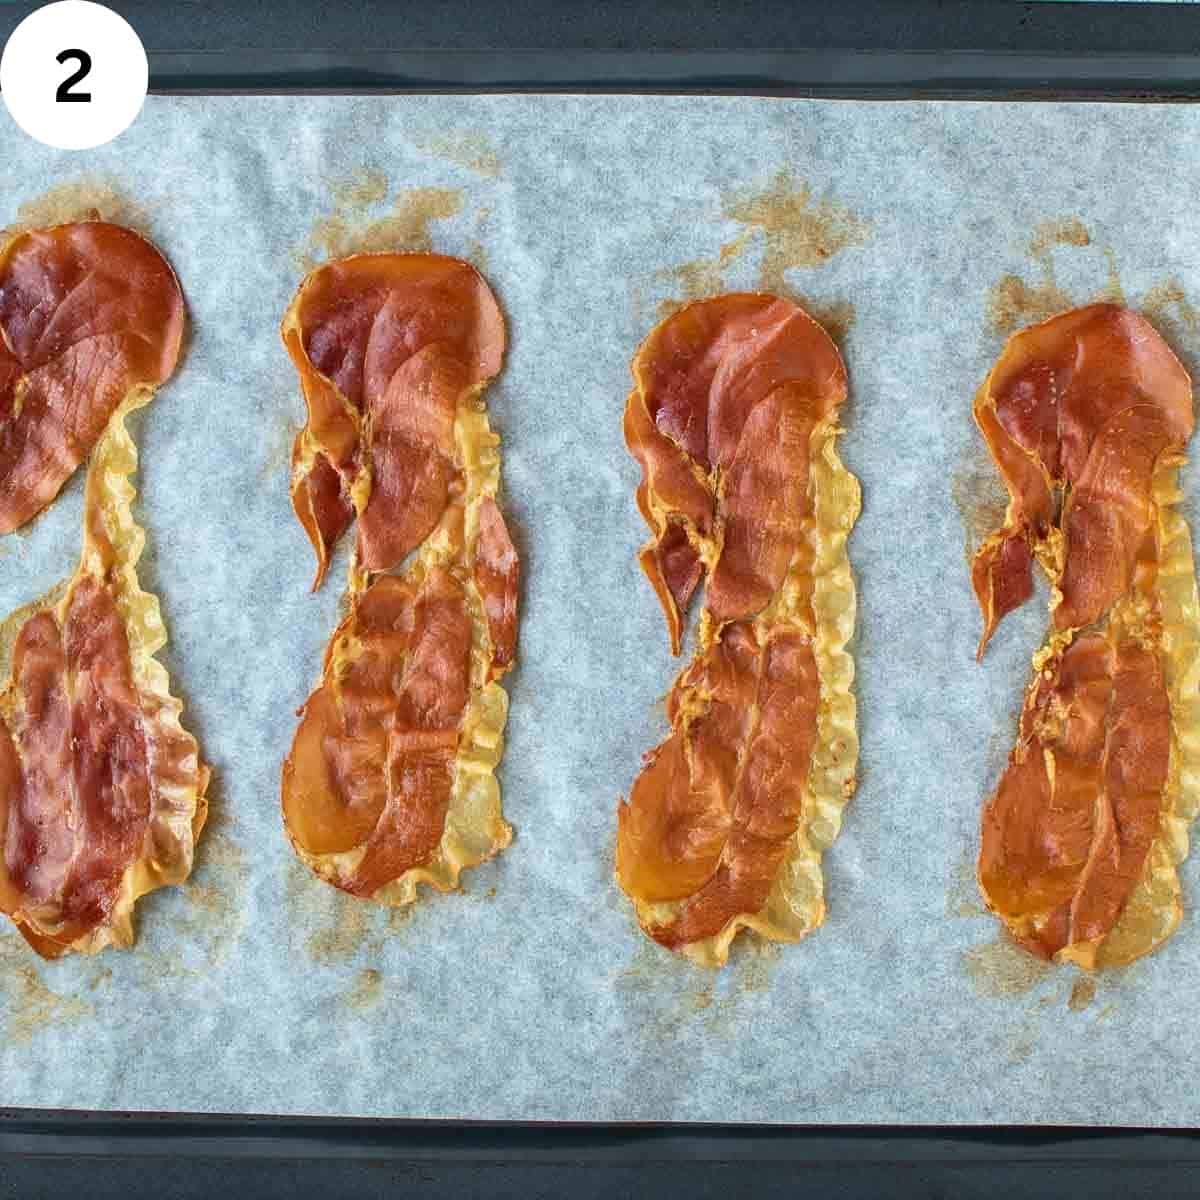 Cooked slices of prosciutto on parchment paper.